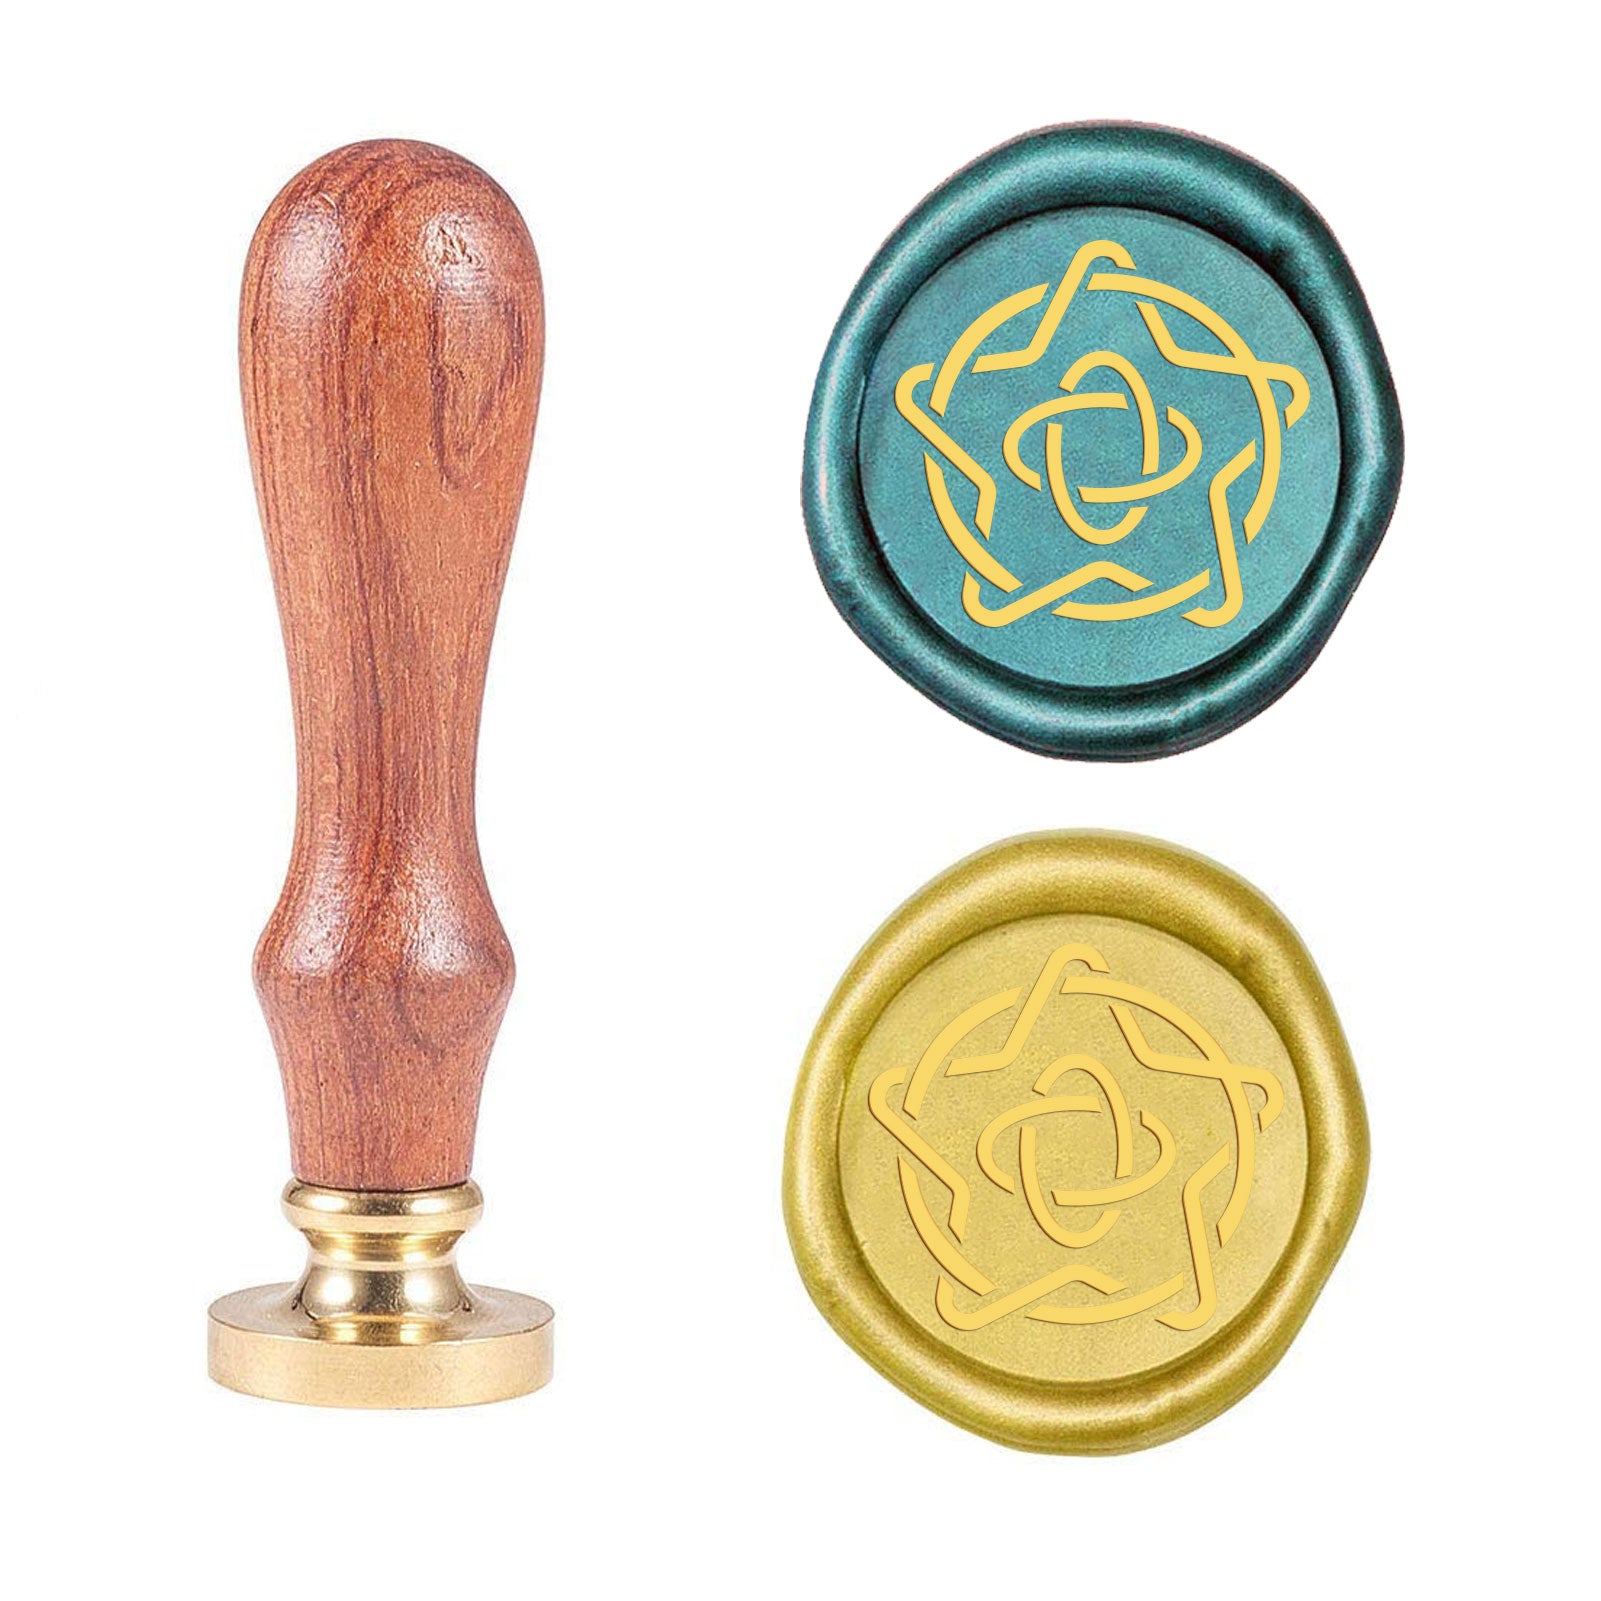 Geometric Five-pointed Star Knot Wood Handle Wax Seal Stamp